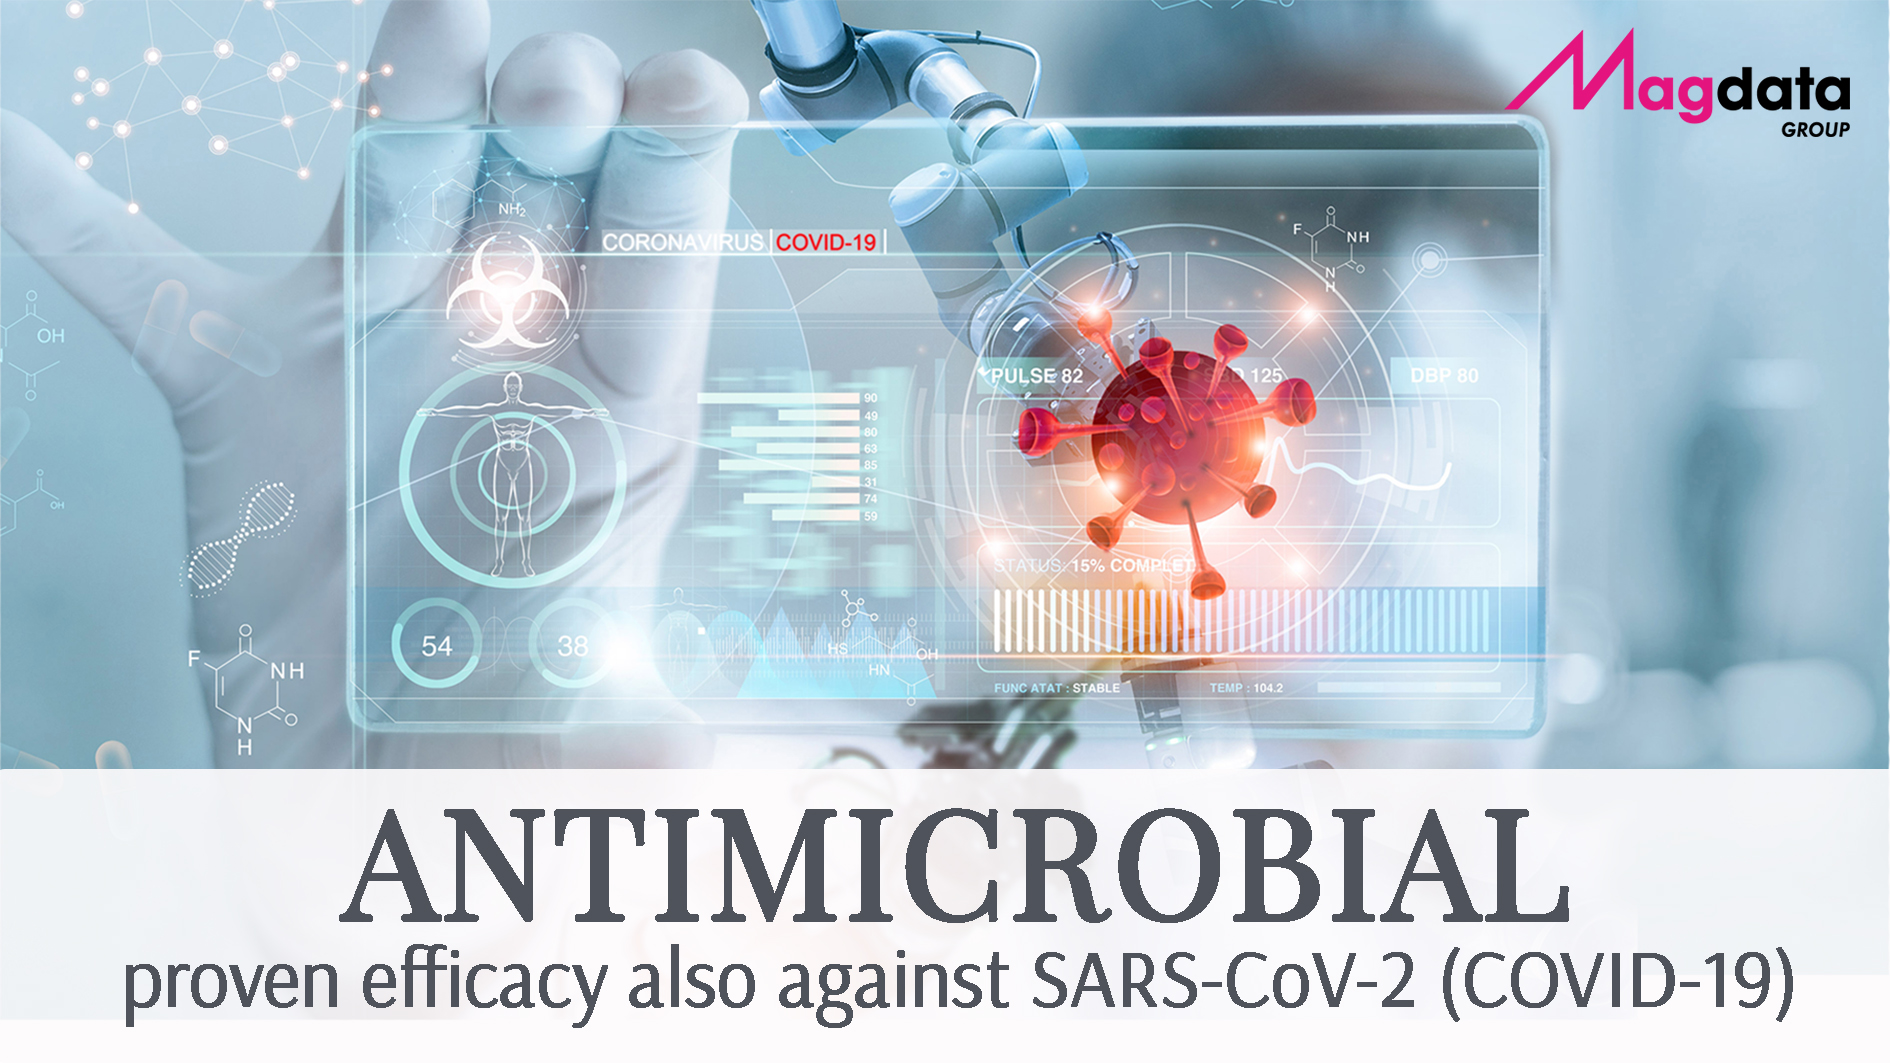 ANTIMICROBIAL: protection against bacteria and viruses (including Covid)